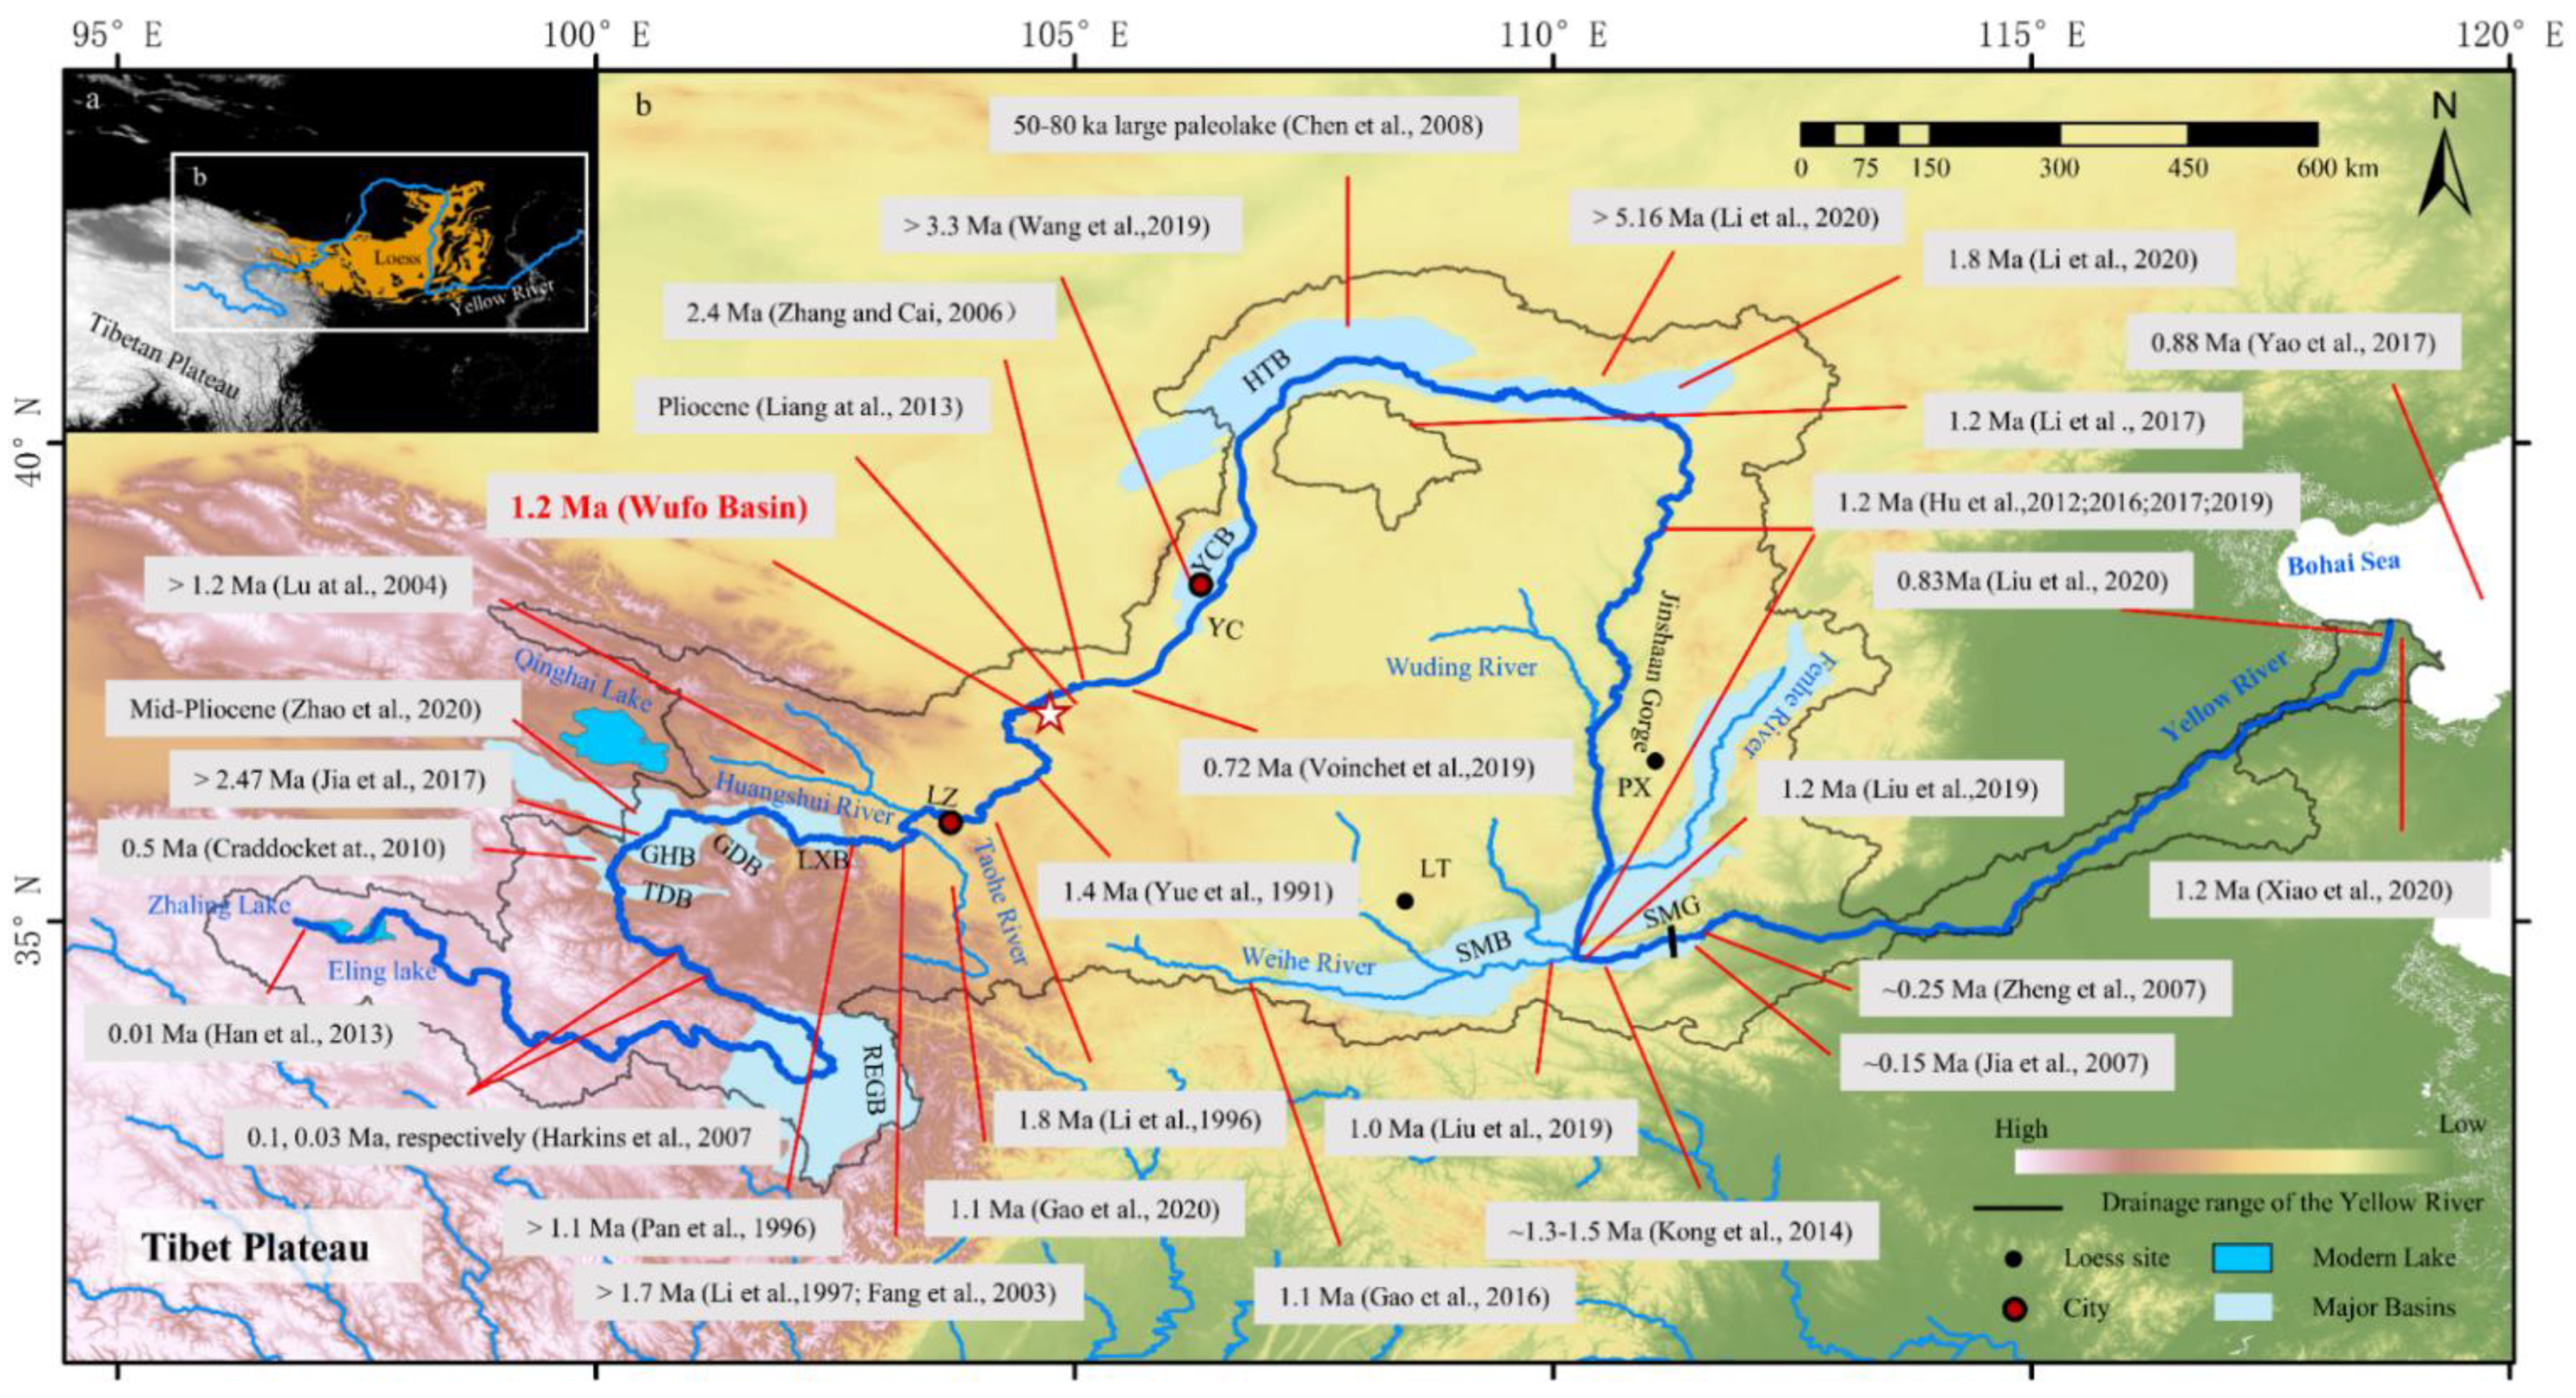 Quaternary | Free Full-Text | Extension of the Upper Yellow River